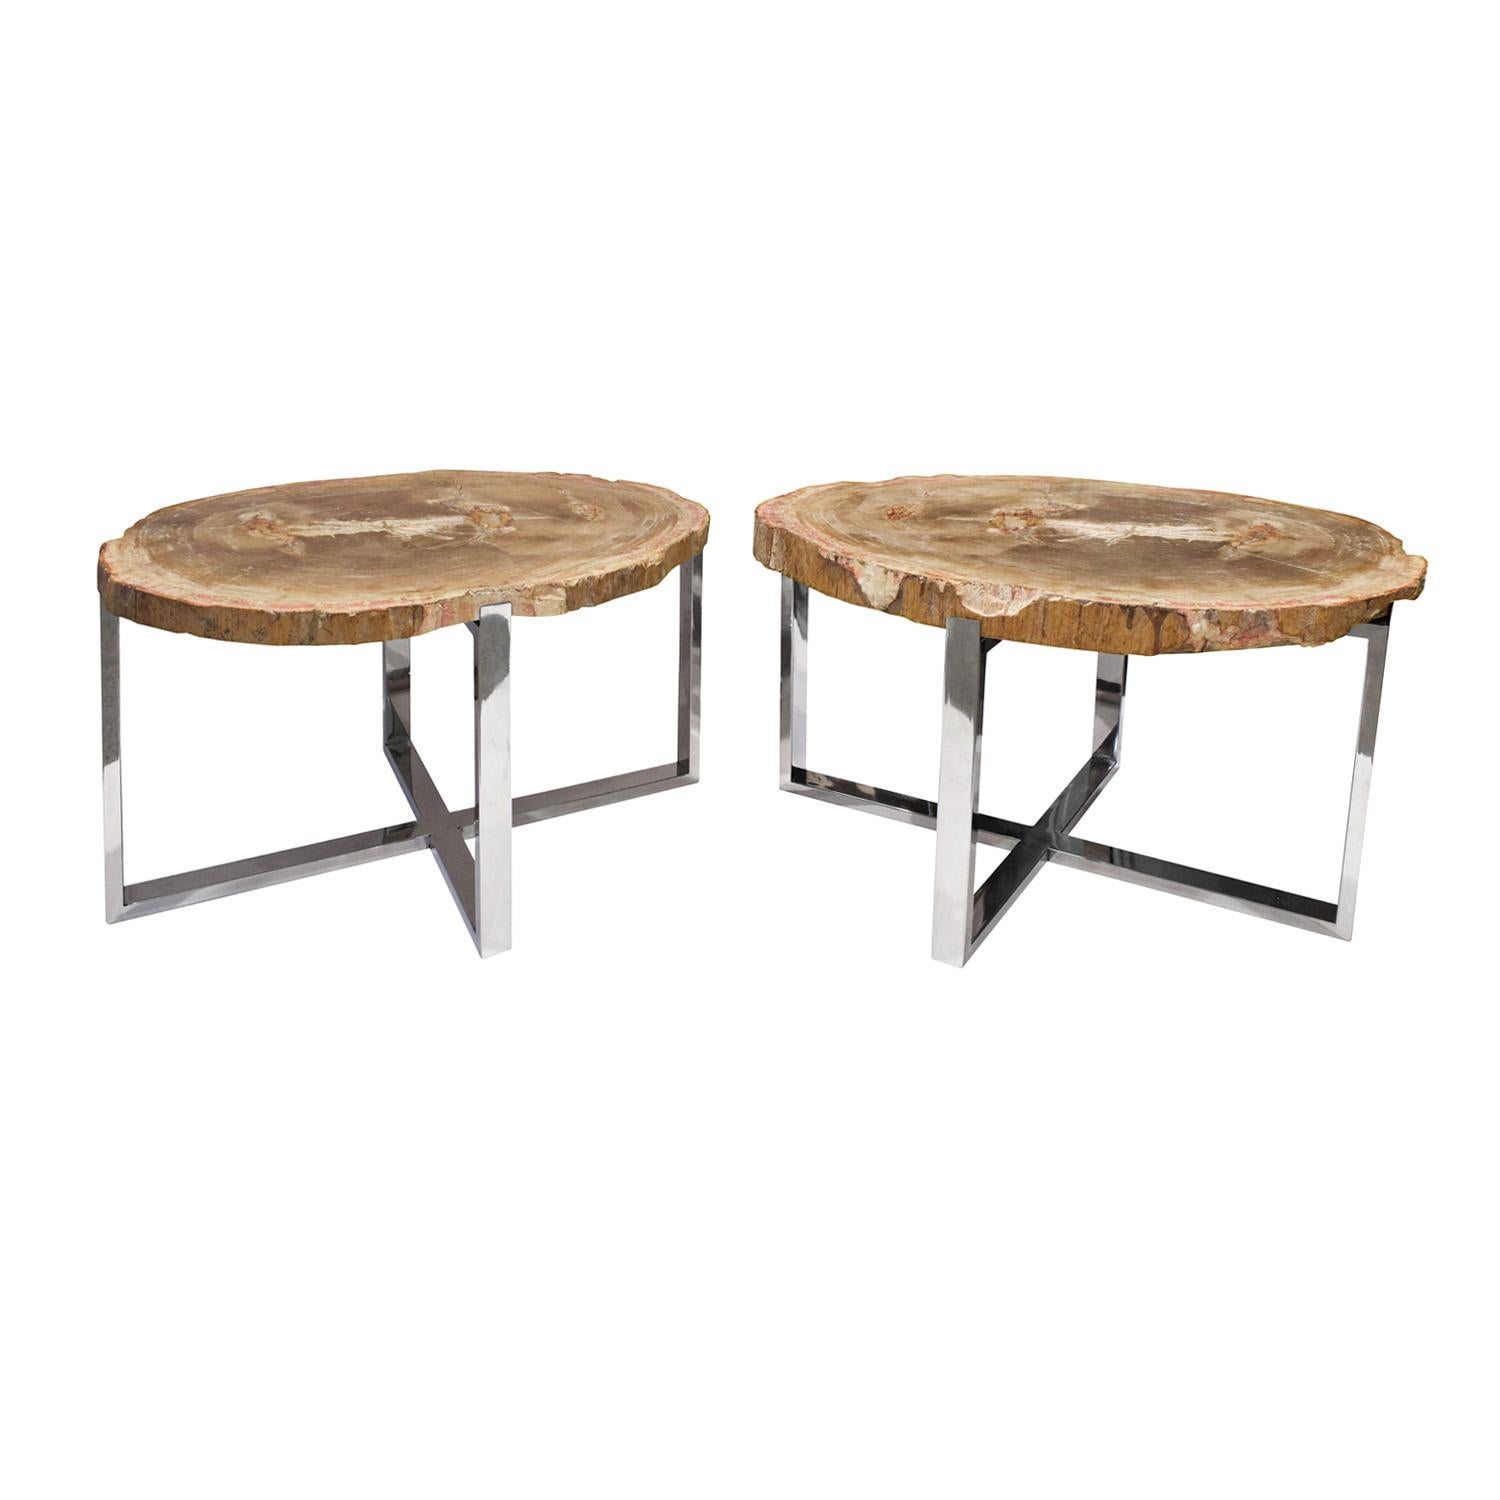 Pair of beautifully crafted end/coffee tables with bases in polished chrome with inset petrified wood tops with natural edges, custom design, American 1990's. The incorporation of petrified wood makes them extraordinary. These can be used as end